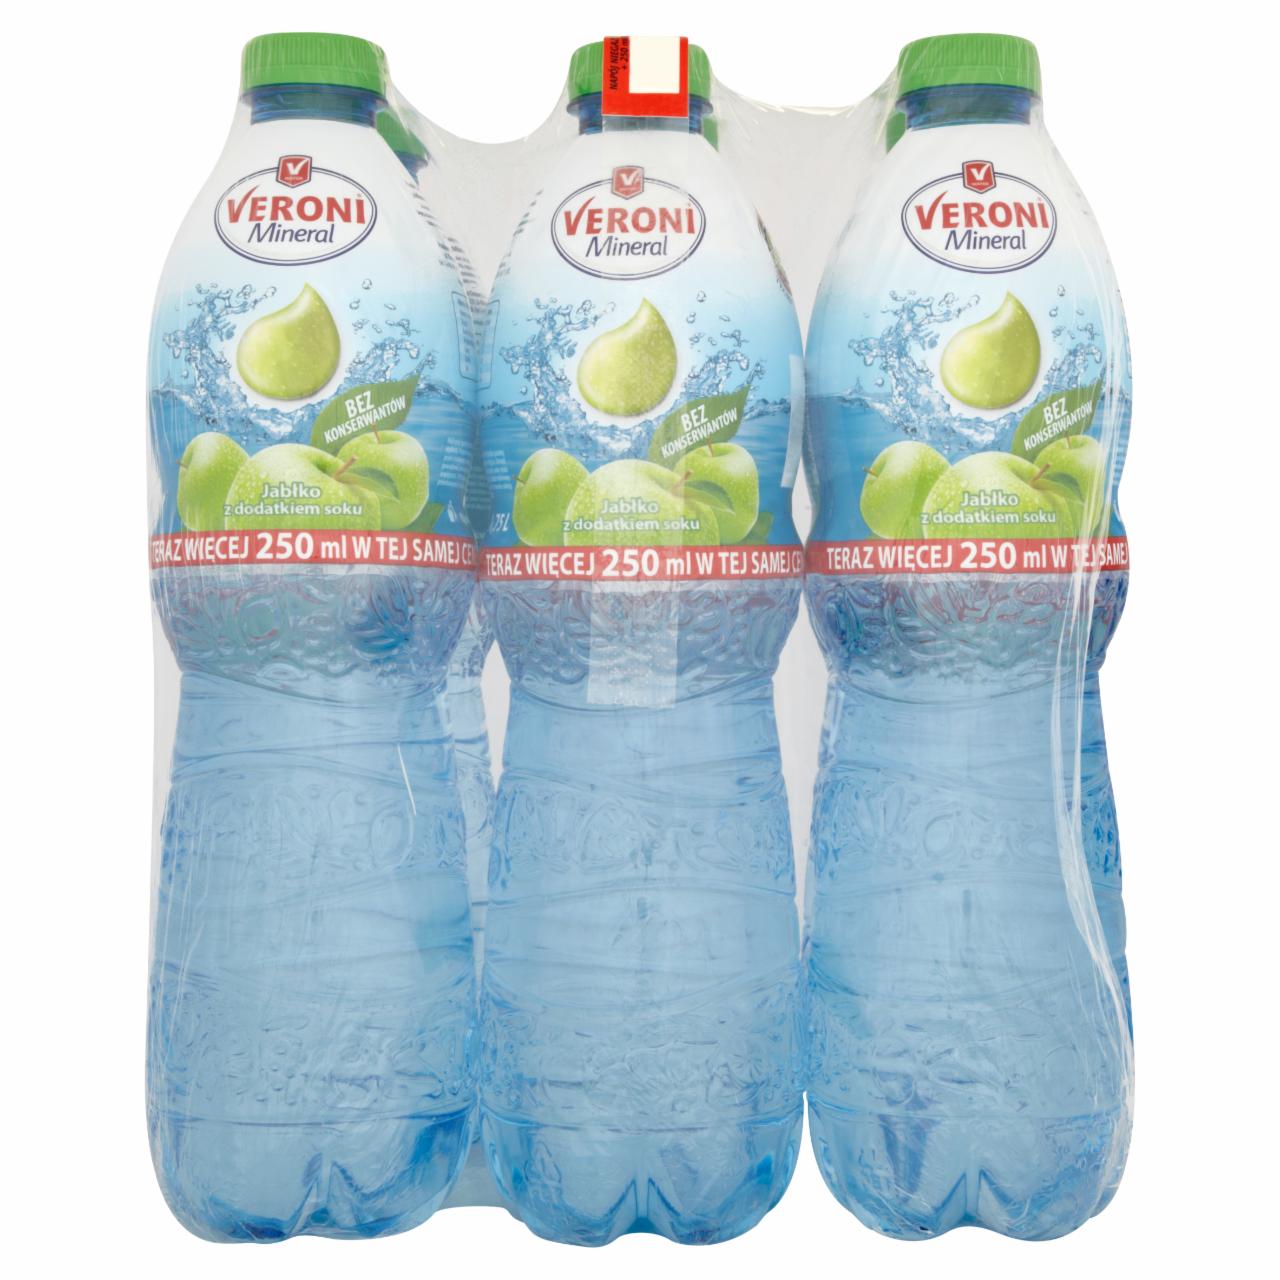 Photo - Veroni Mineral Apple with Juice Drink 6 x 1.75 L